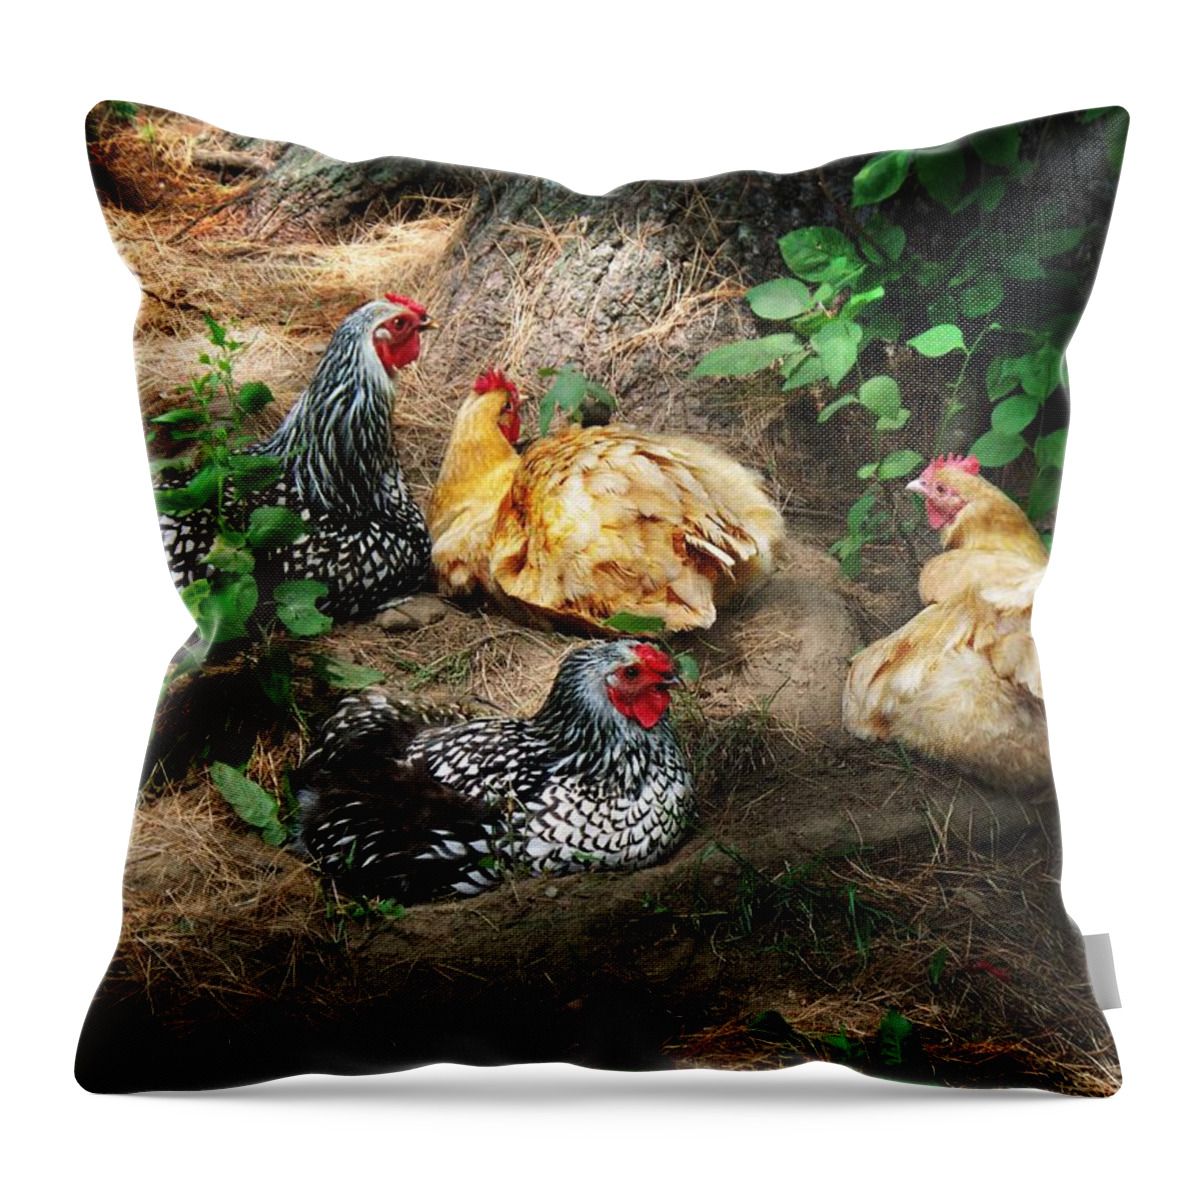 Chicken Dust Bath Party Throw Pillow featuring the photograph Chicken Dust Bath party by Joy Nichols